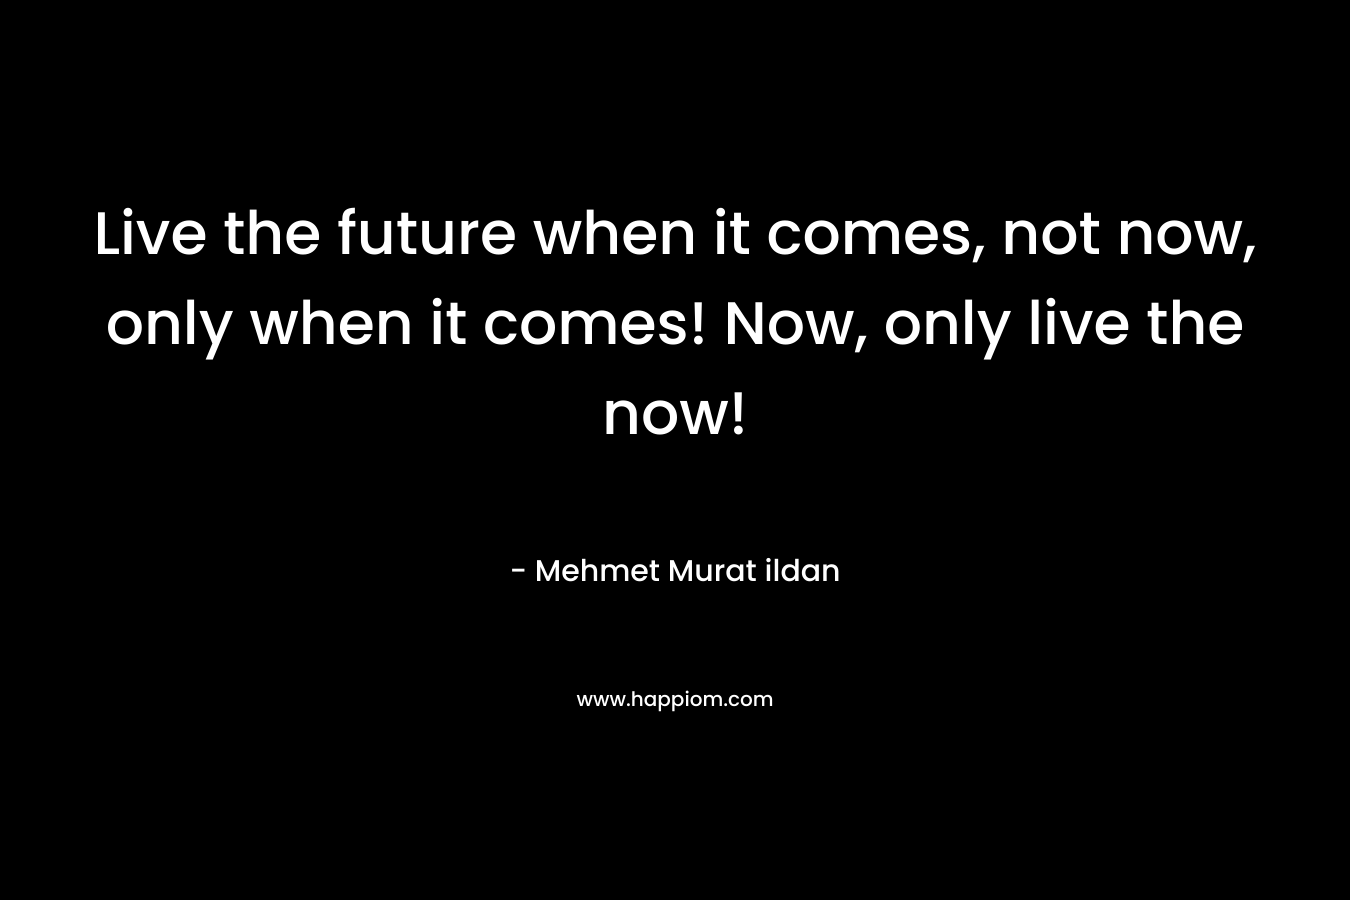 Live the future when it comes, not now, only when it comes! Now, only live the now!